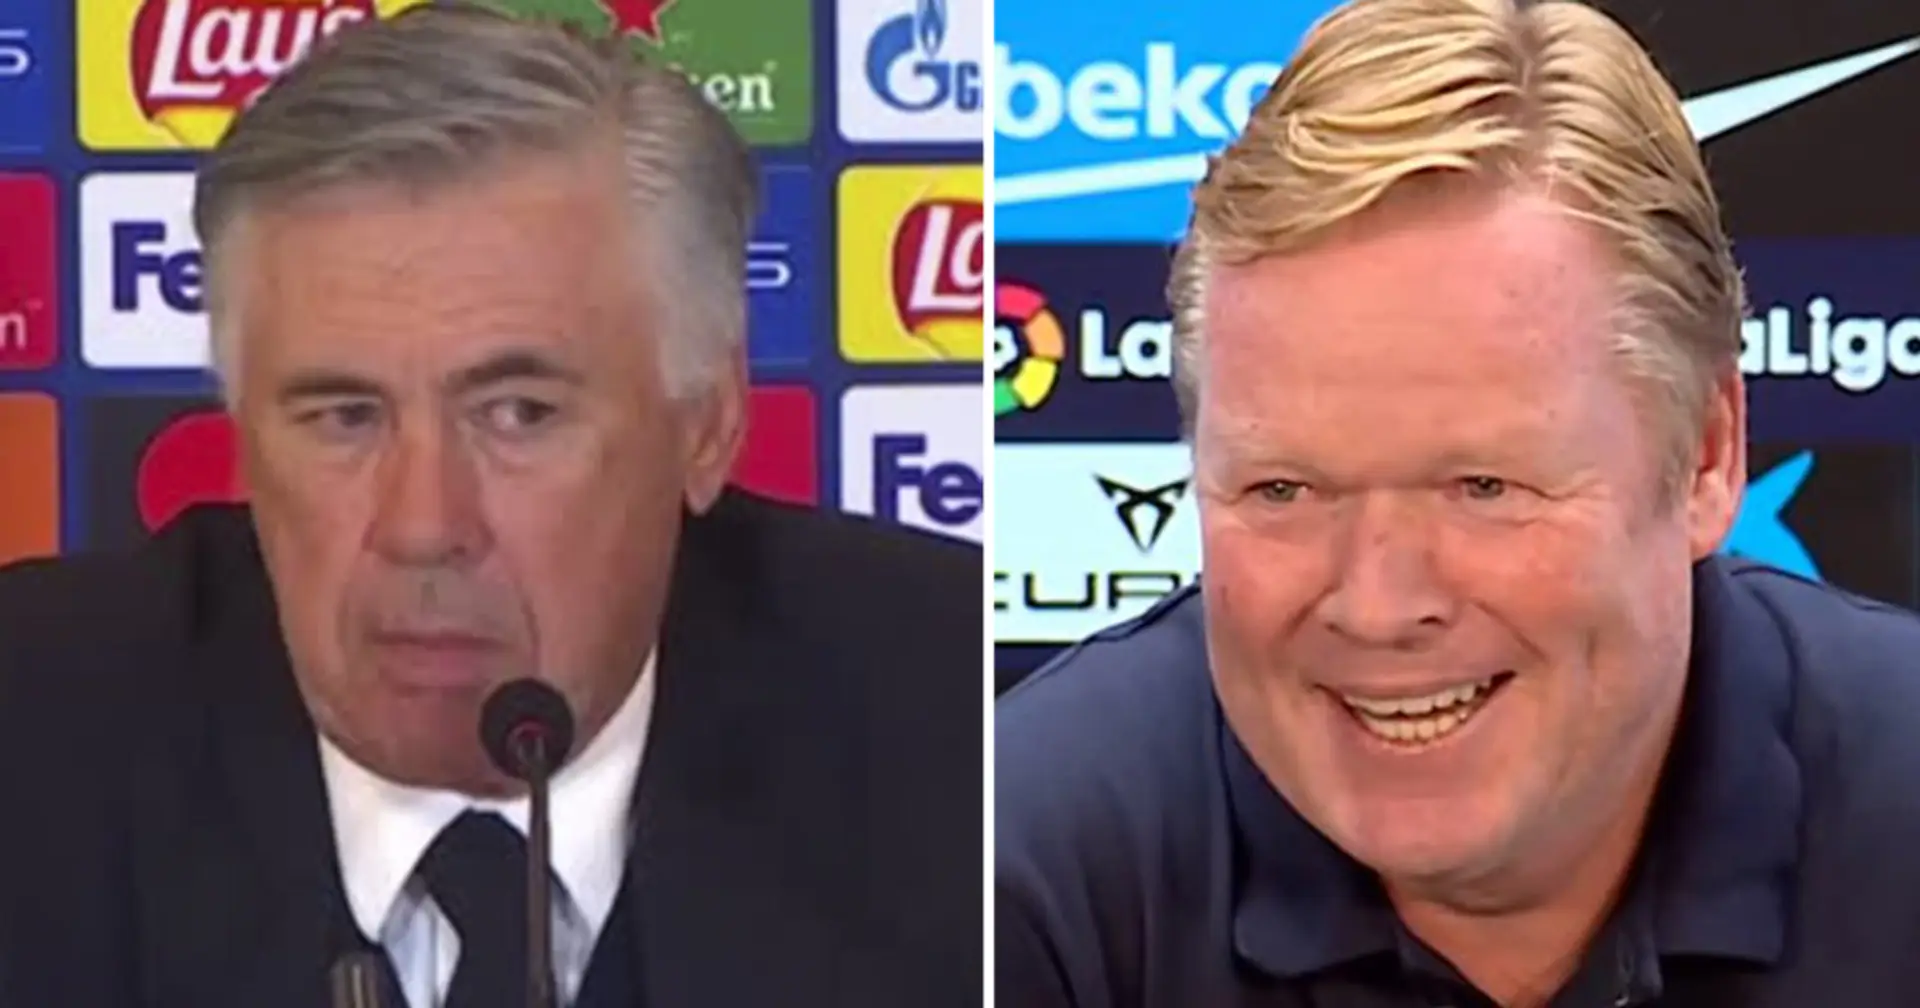 Ancelotti: 'Koeman is a good manager. Everyone speaks highly of him'